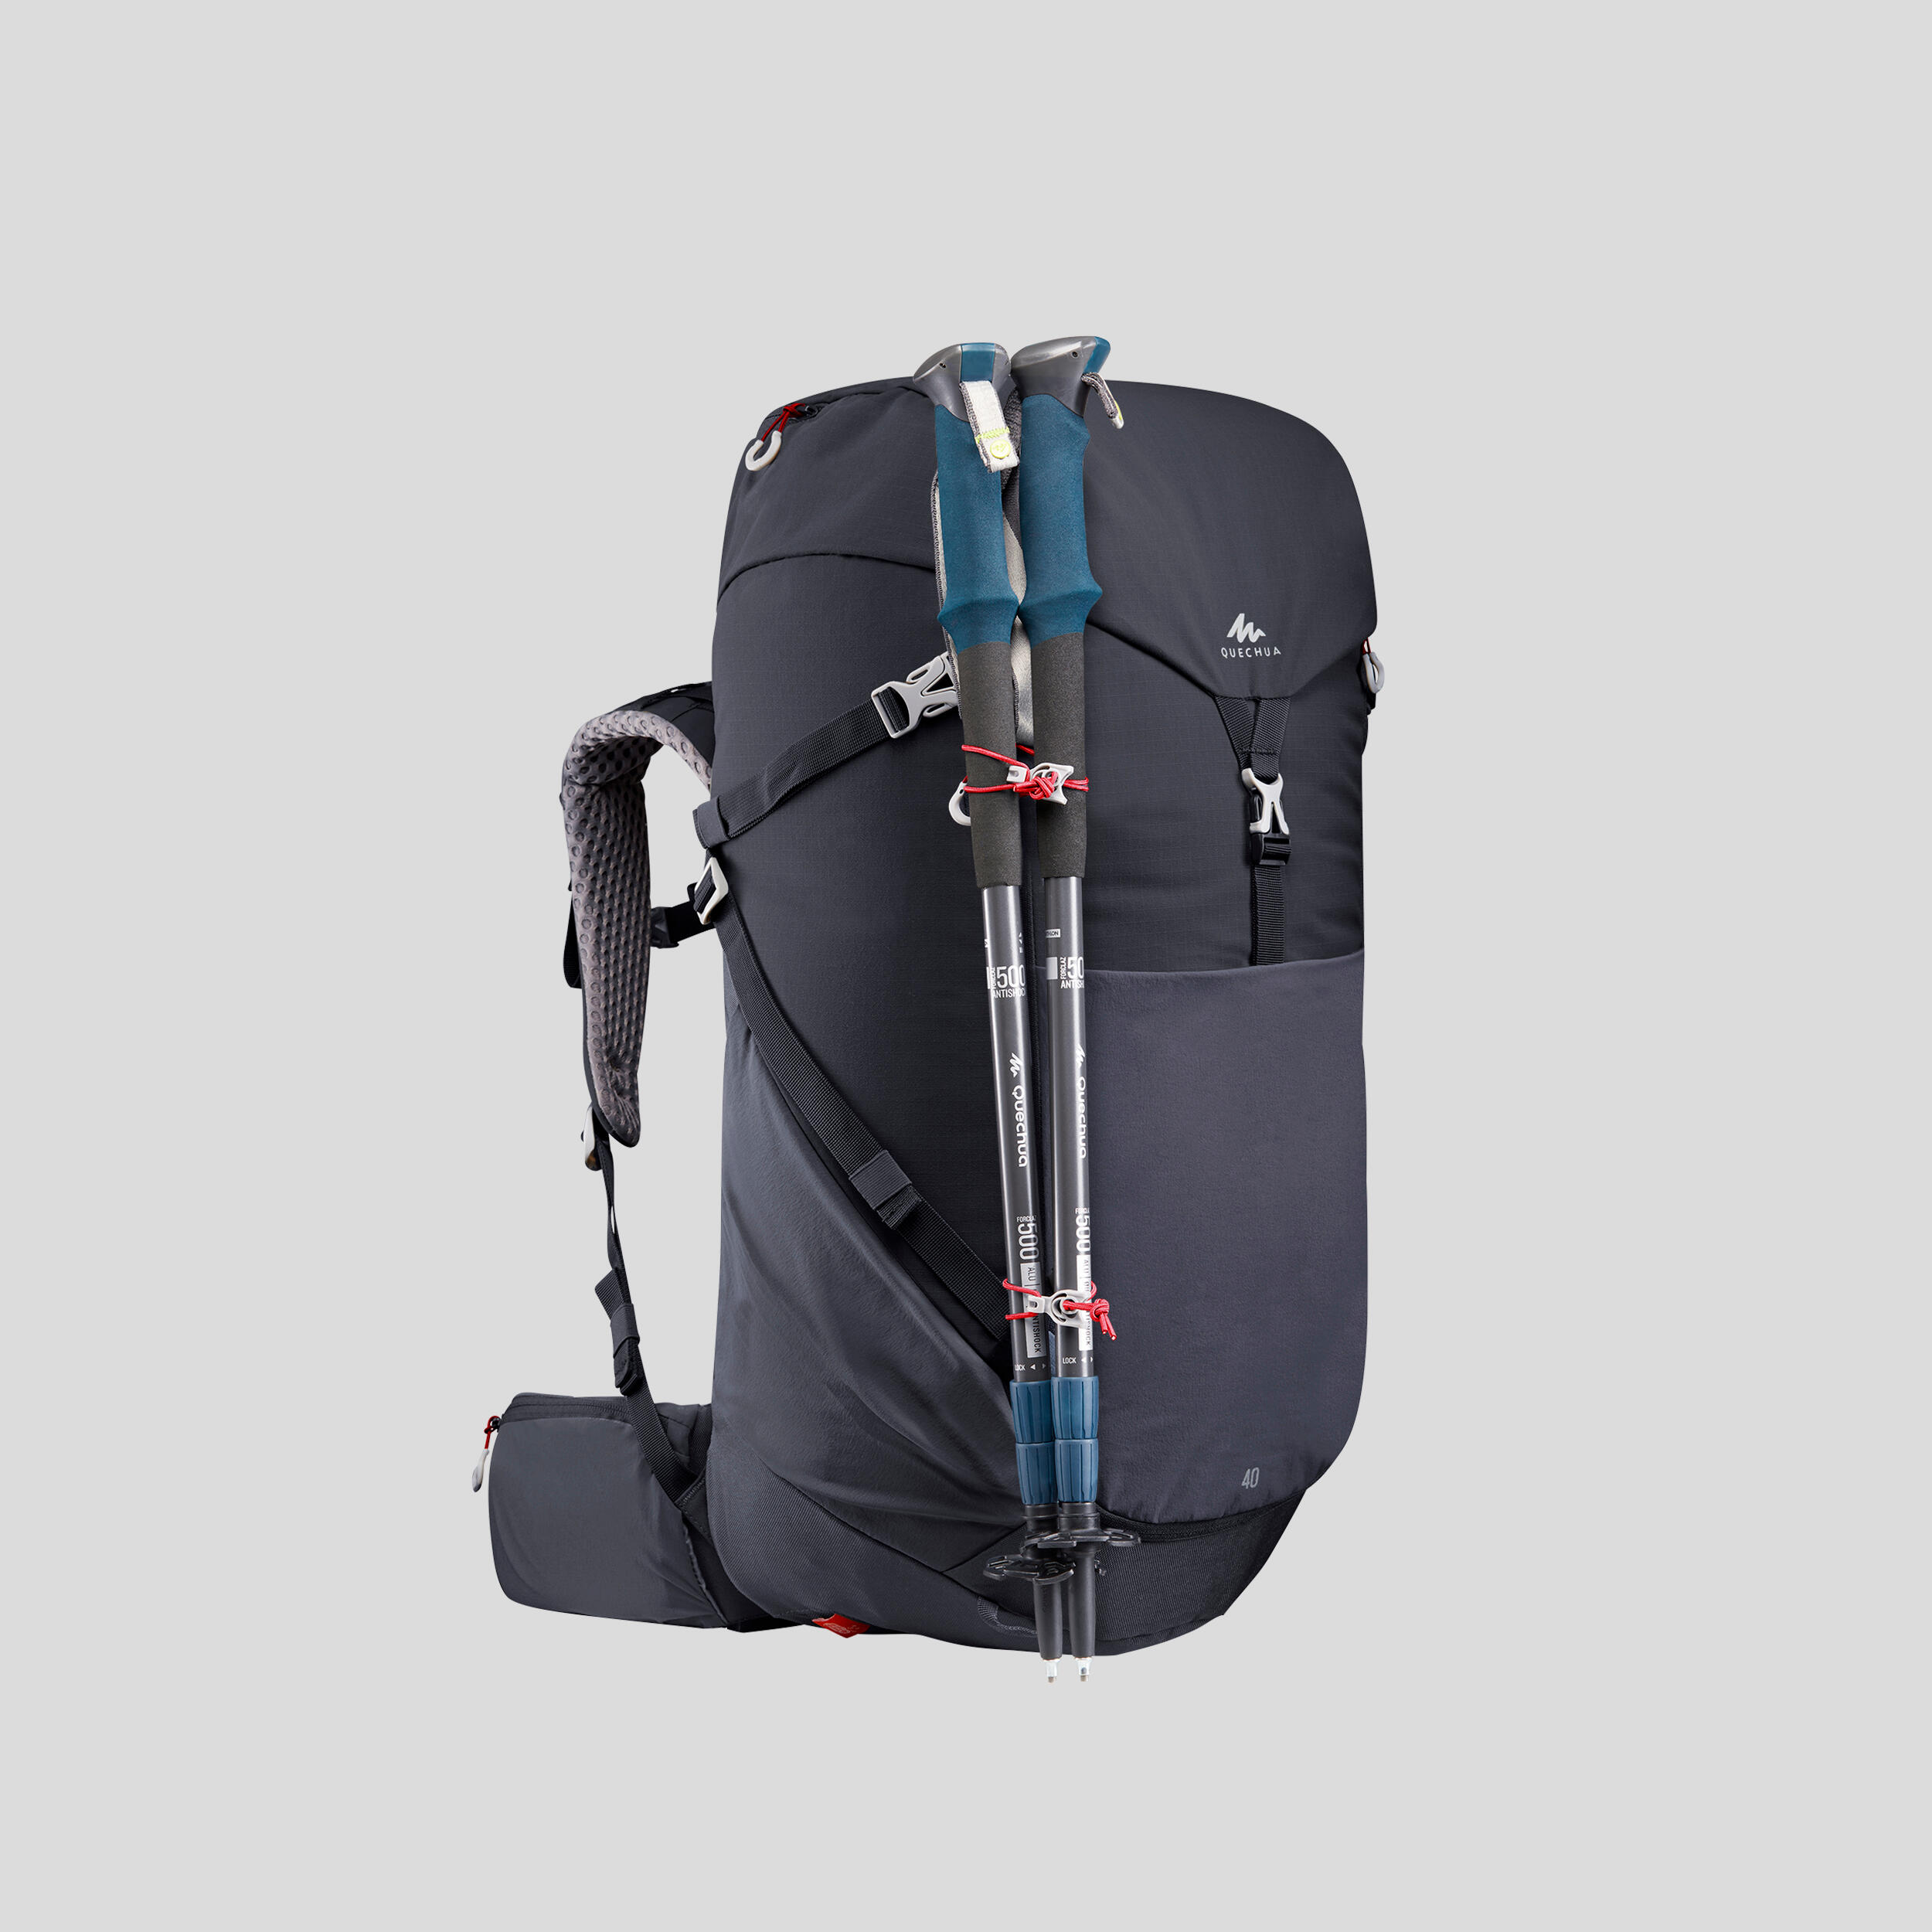 Mountain walking backpack - MH500 40L 